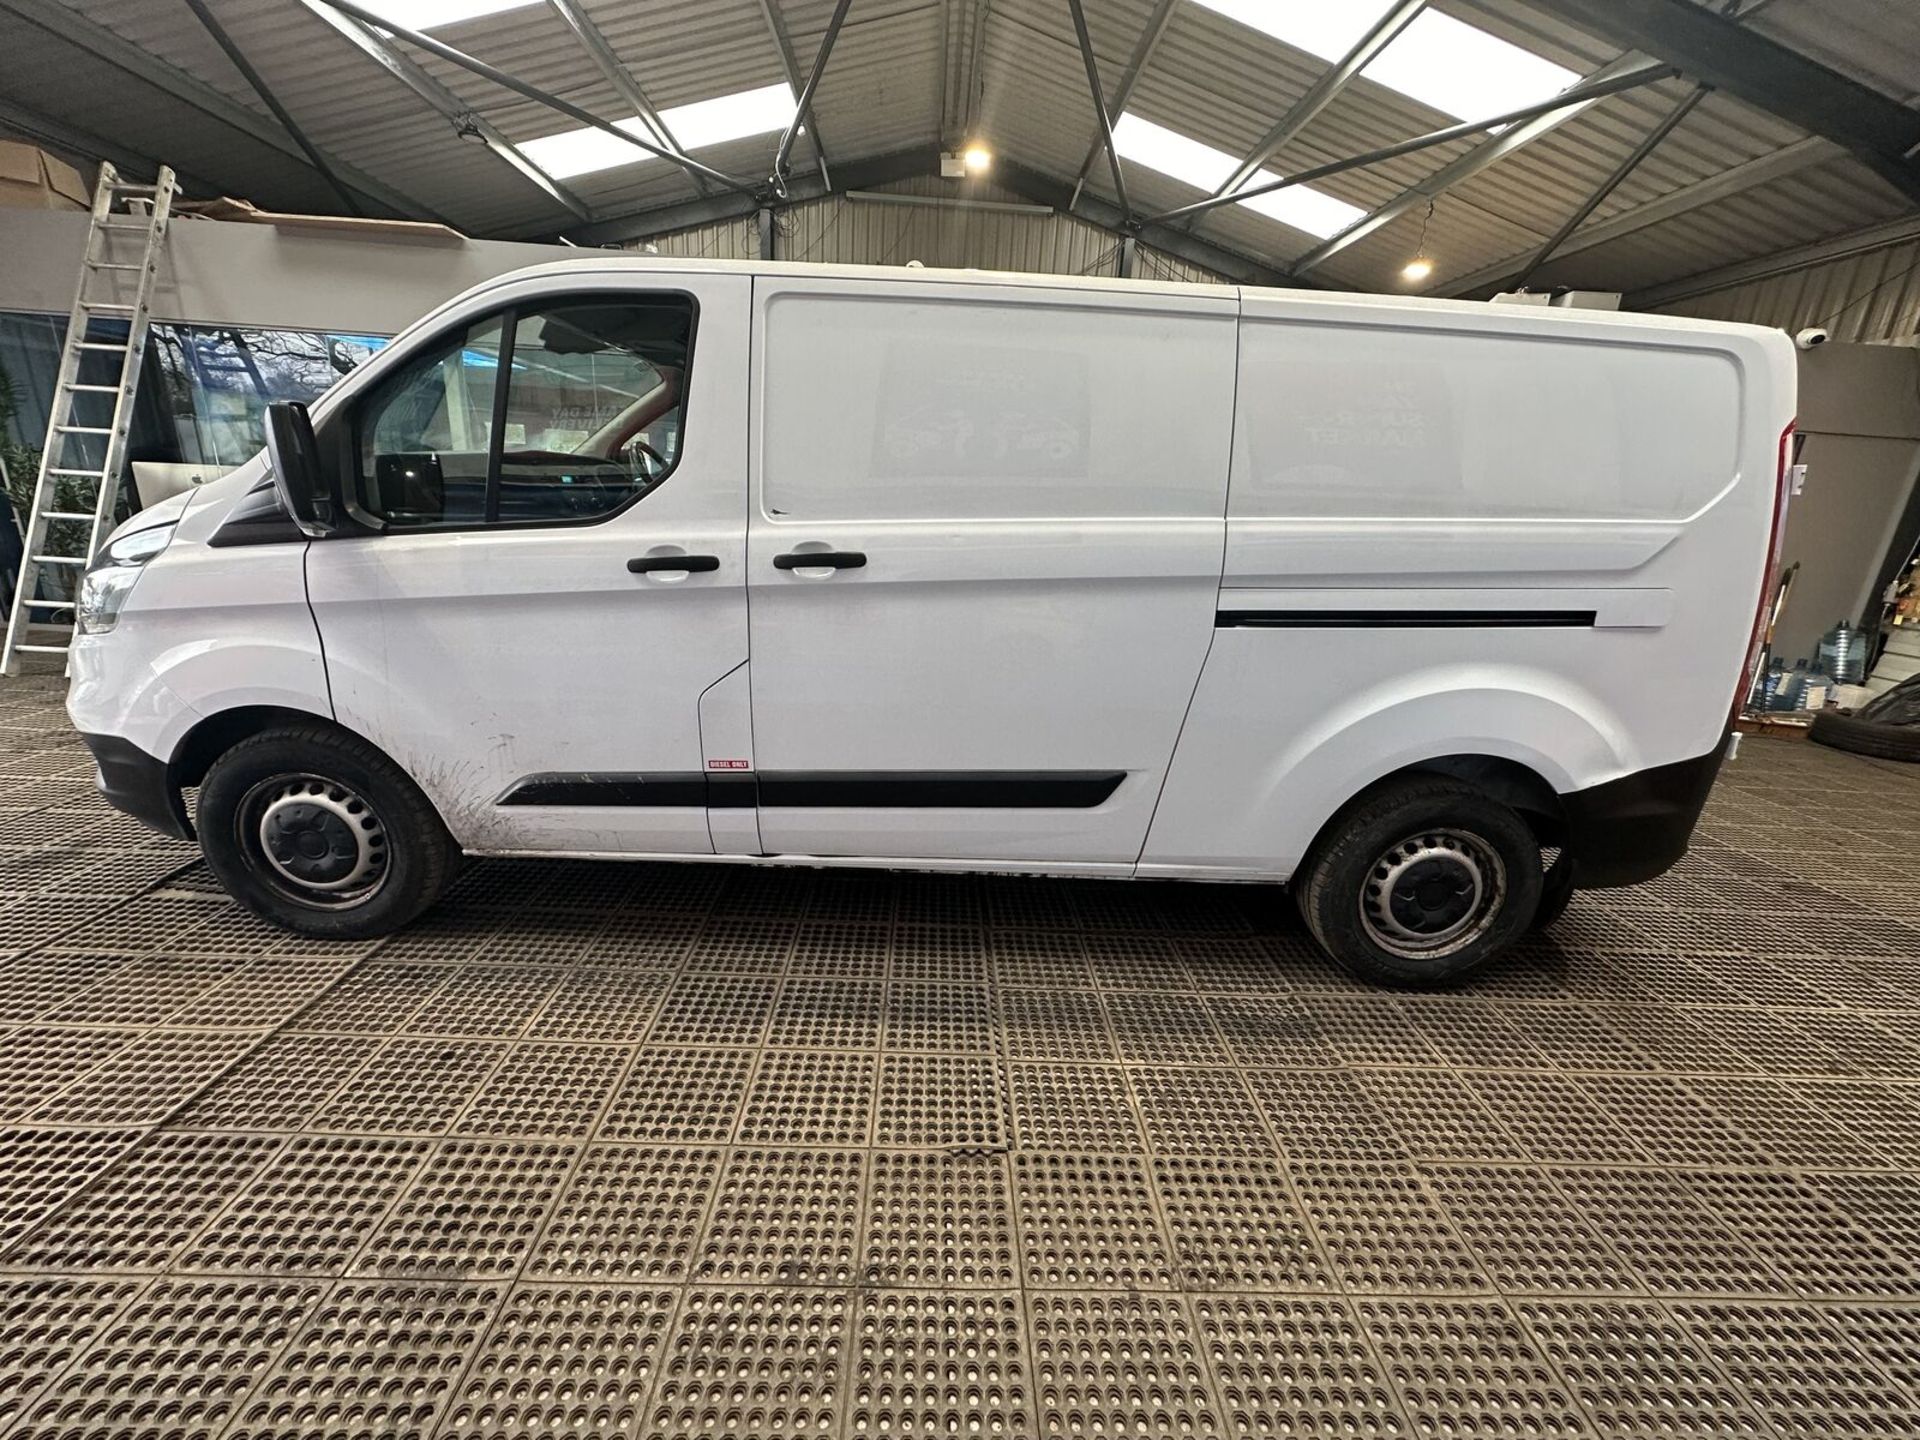 YOUR RELIABLE PARTNER: 2019 FORD TRANSIT CUSTOM - FULL FEATURES, FULL CONFIDENCE - Image 3 of 11